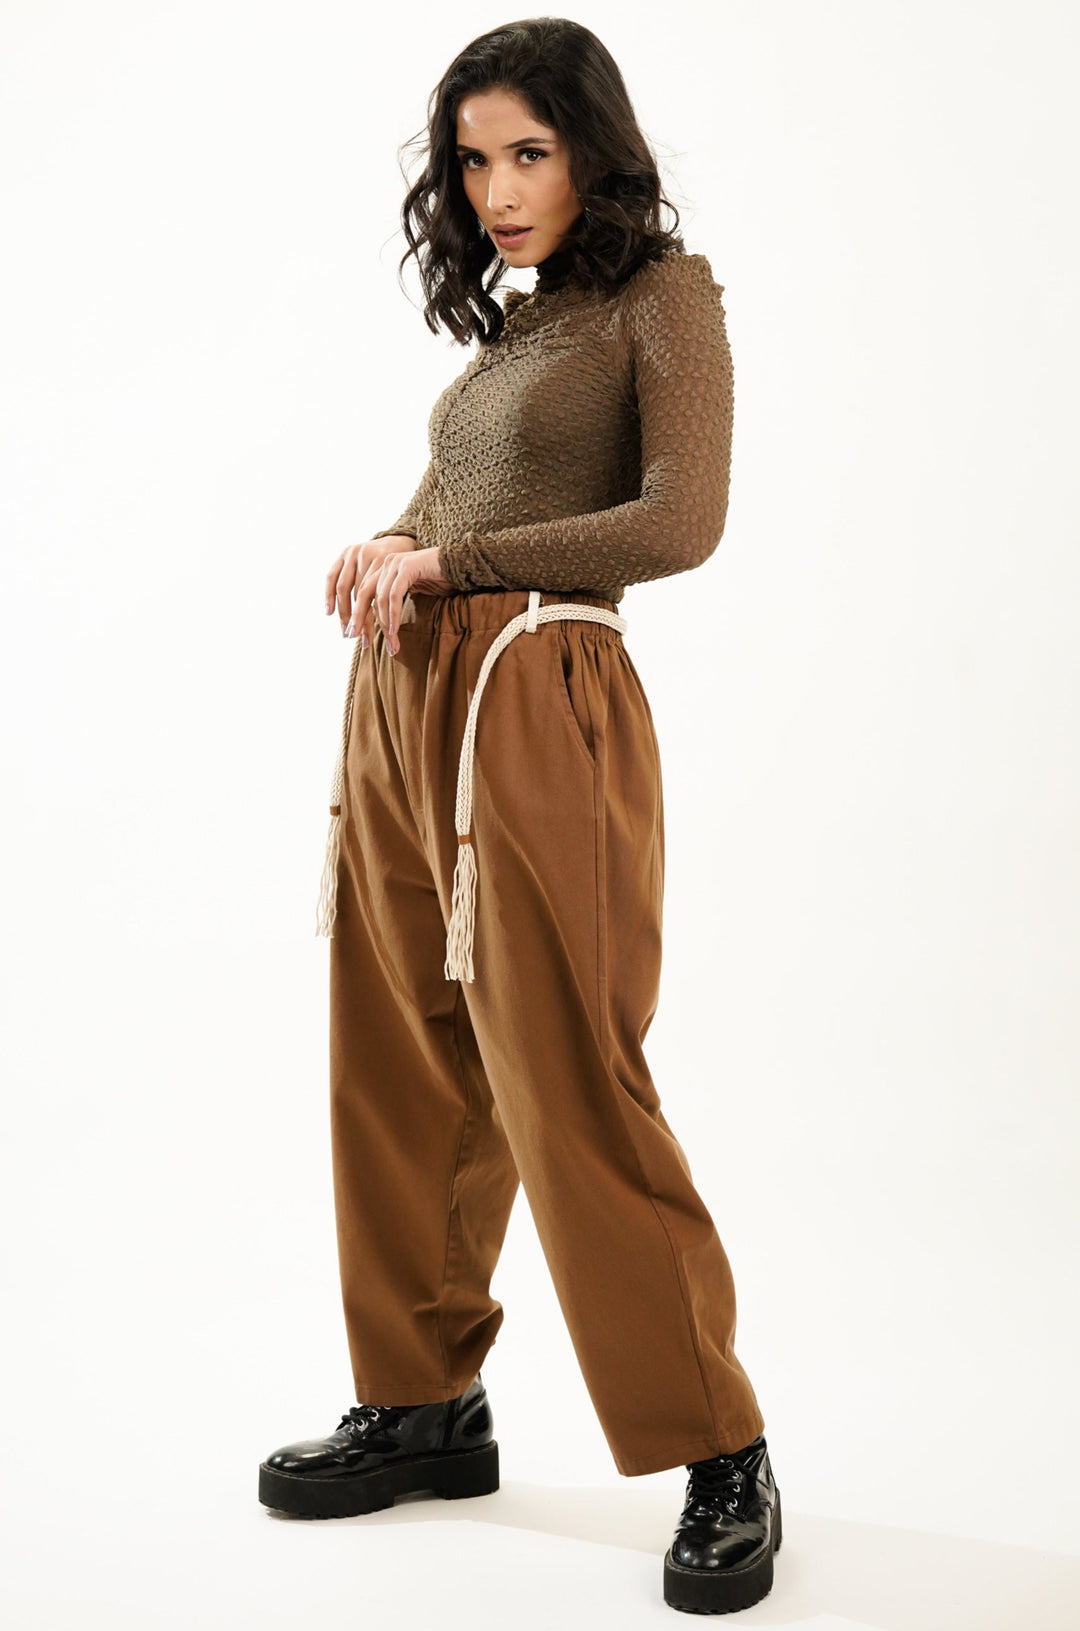 Brown twill pants for women with a regular fit